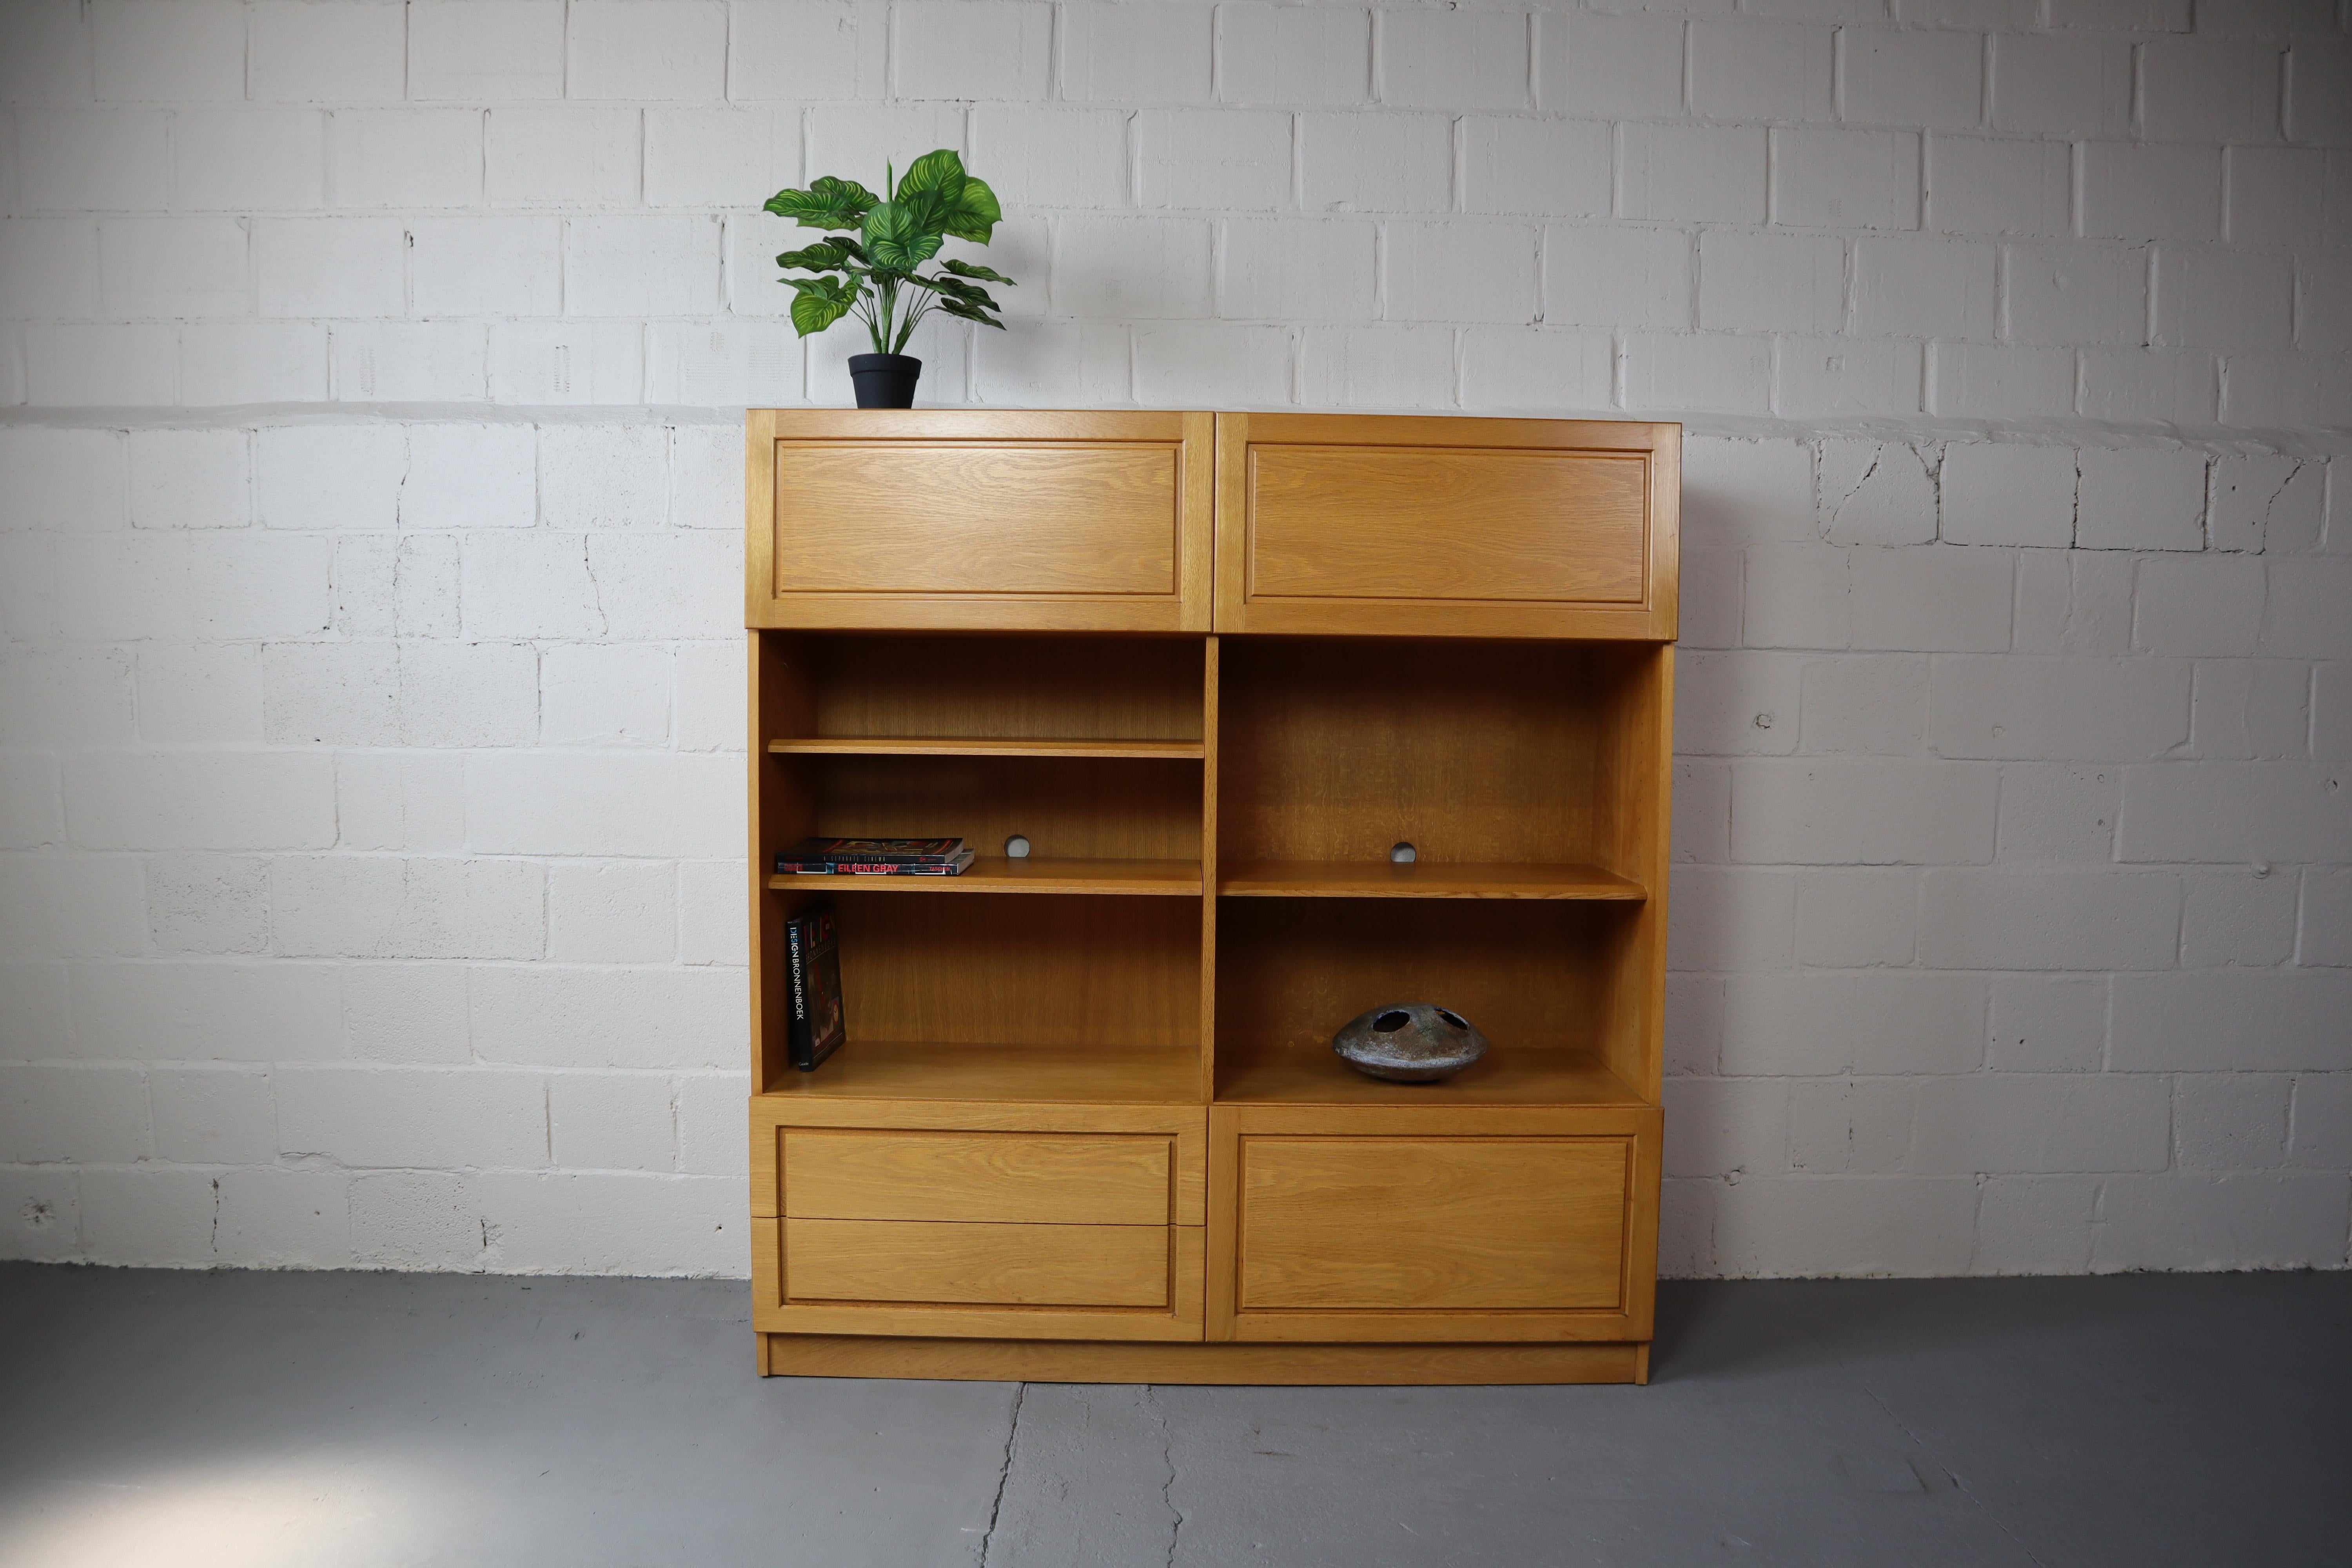 Bookcase/ wall cabinet by Jos De Mey for Van den Berghe-Pauvers, 1970s.
This very high-quality cabinet is in solid oak. Van den Berghe-Pauvers was known for its very good quality furniture.